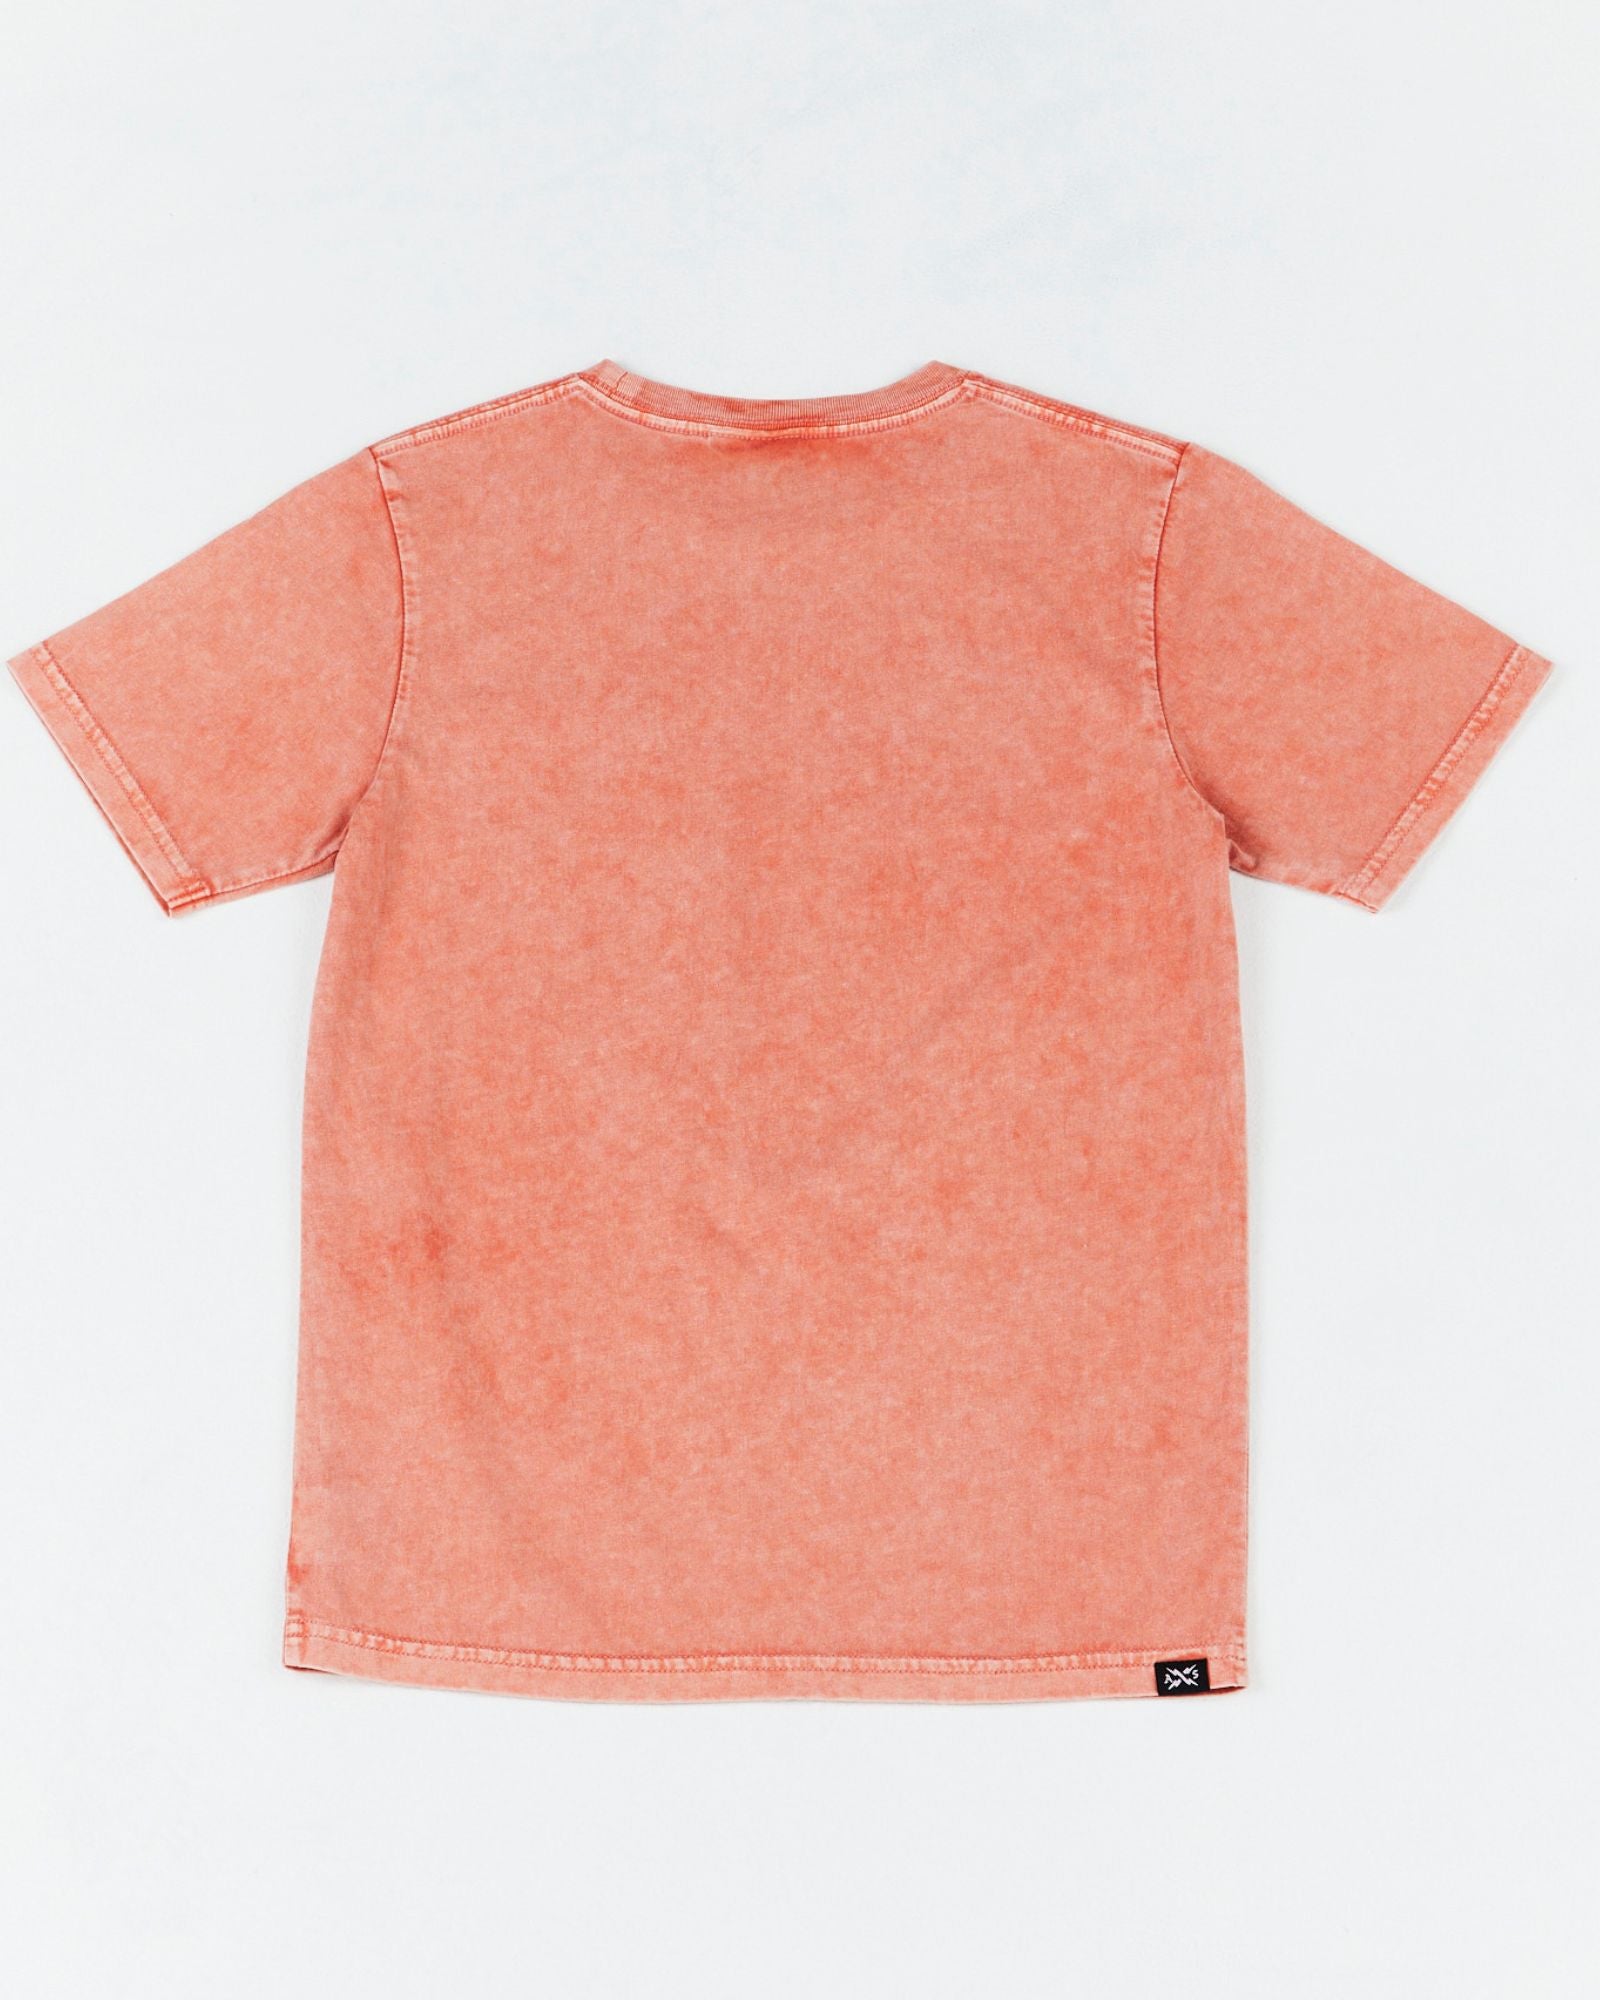 Alphabet Soup's Kids Go To Pocket Tee for boys aged 2 to 7. Crafted in 100% cotton jersey and featuring acid wash, pocket & trim logo, Cinnamon hue, regular fit, ribbed neckline, short sleeves and straight hem.